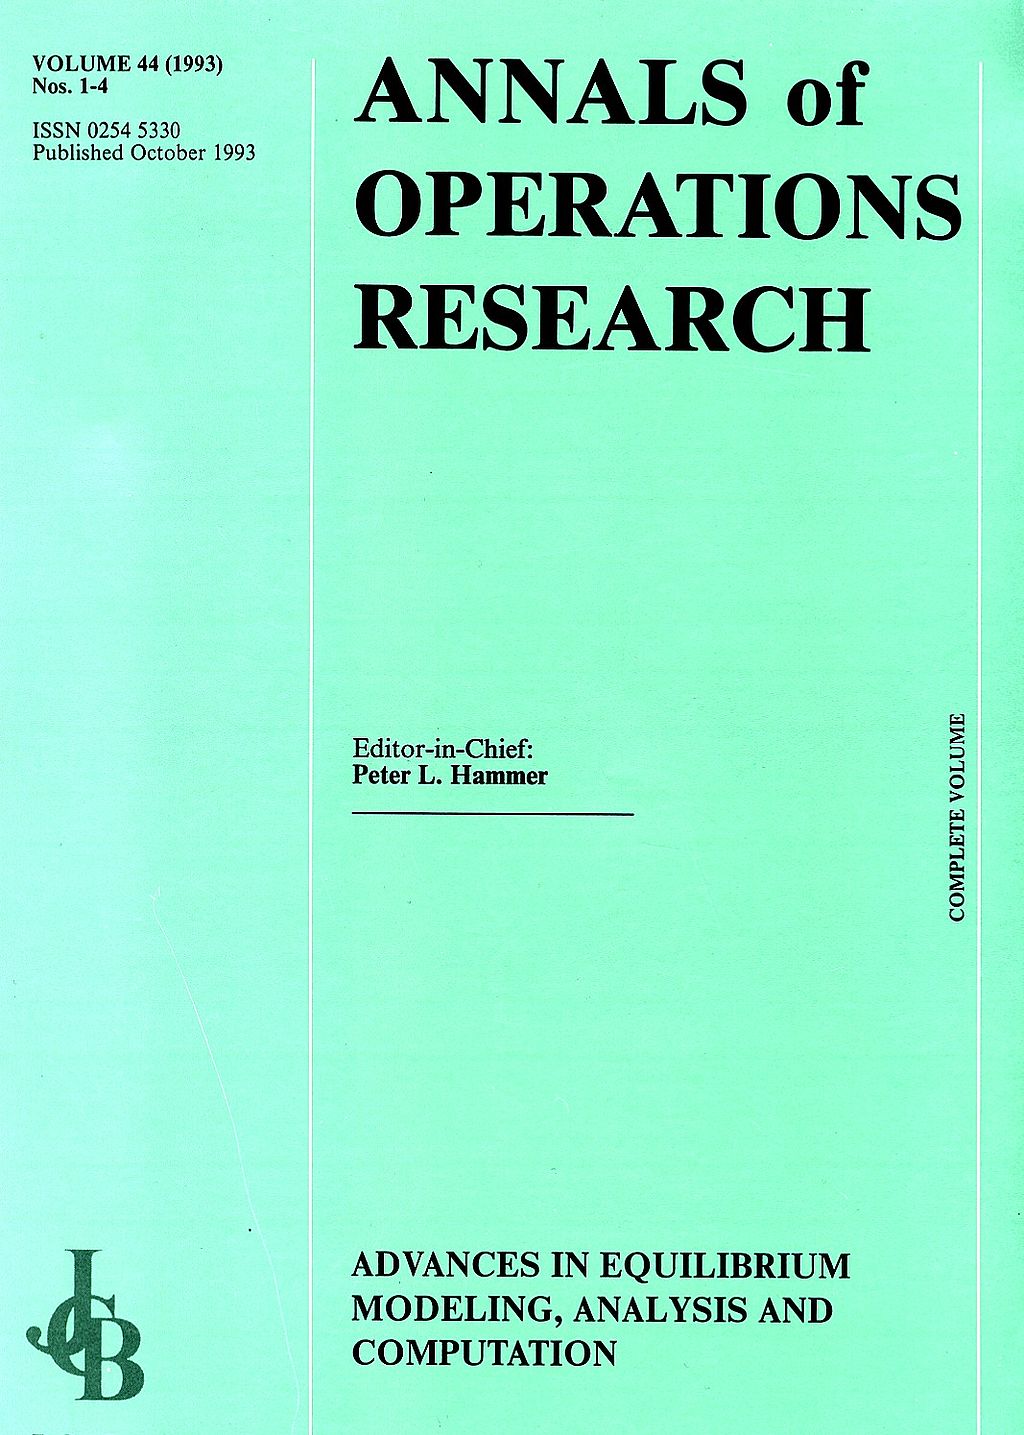 cover_annals-of-operations-research.jpg